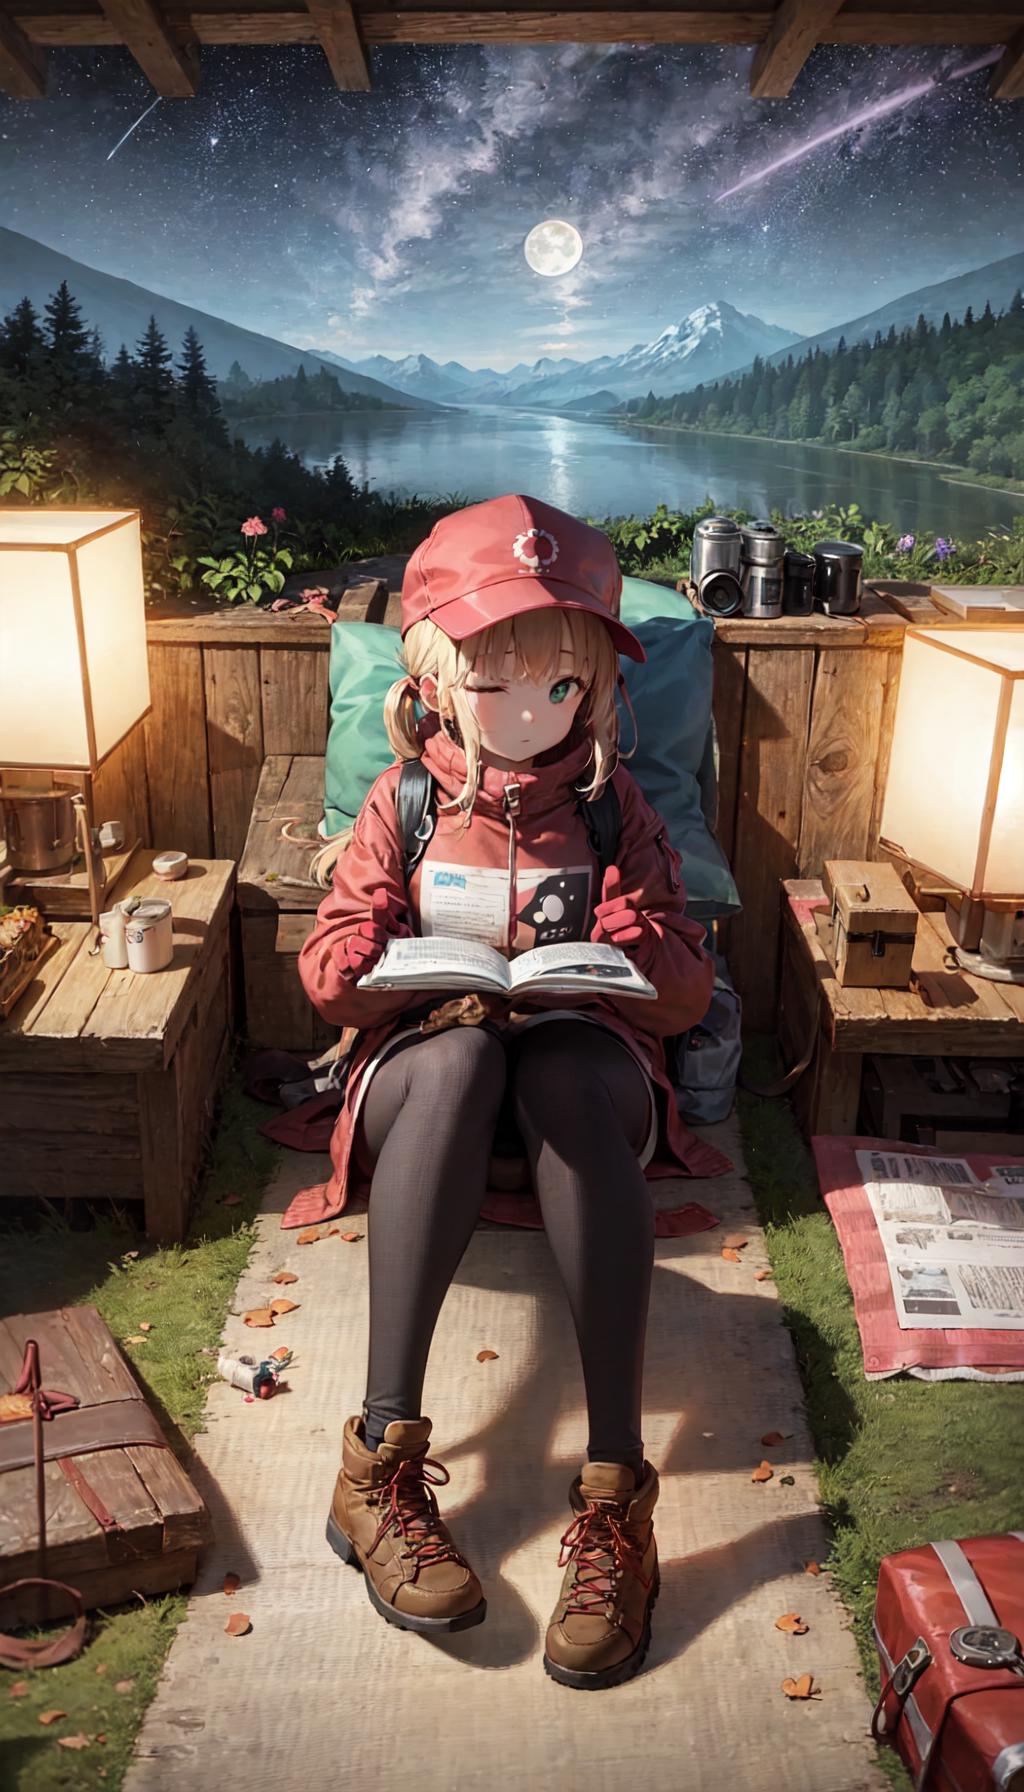 A girl reading a book while sitting on a bench.